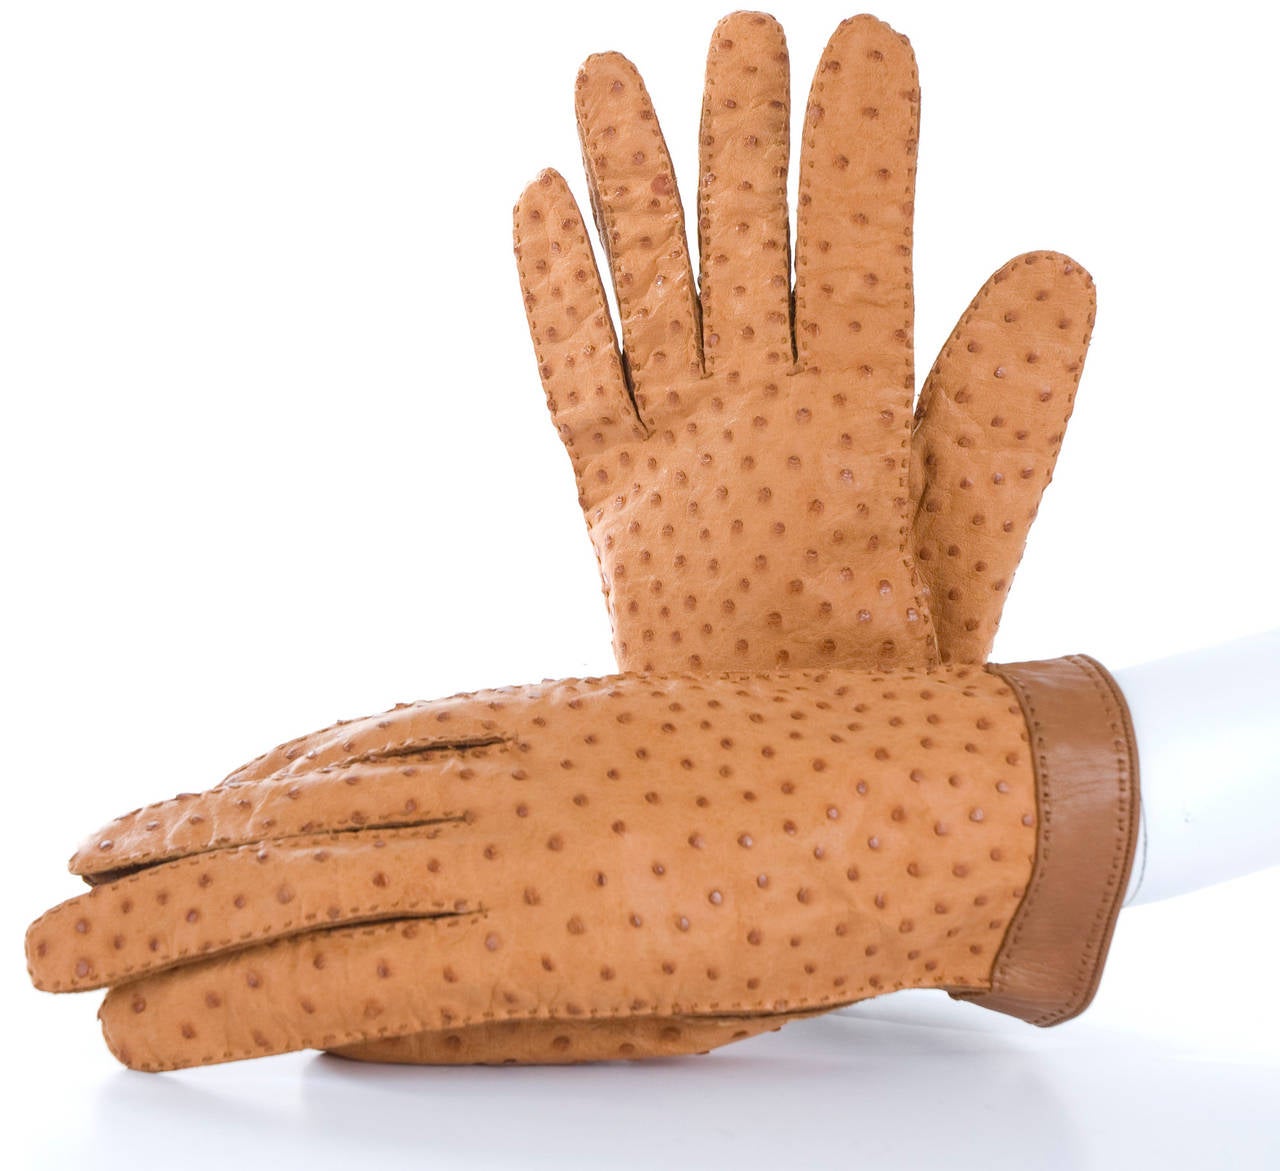 Vintage Hermes Gloves in combination of Leather and Ostrich Leather.
Never used - in perfect condition.
Size 7.5